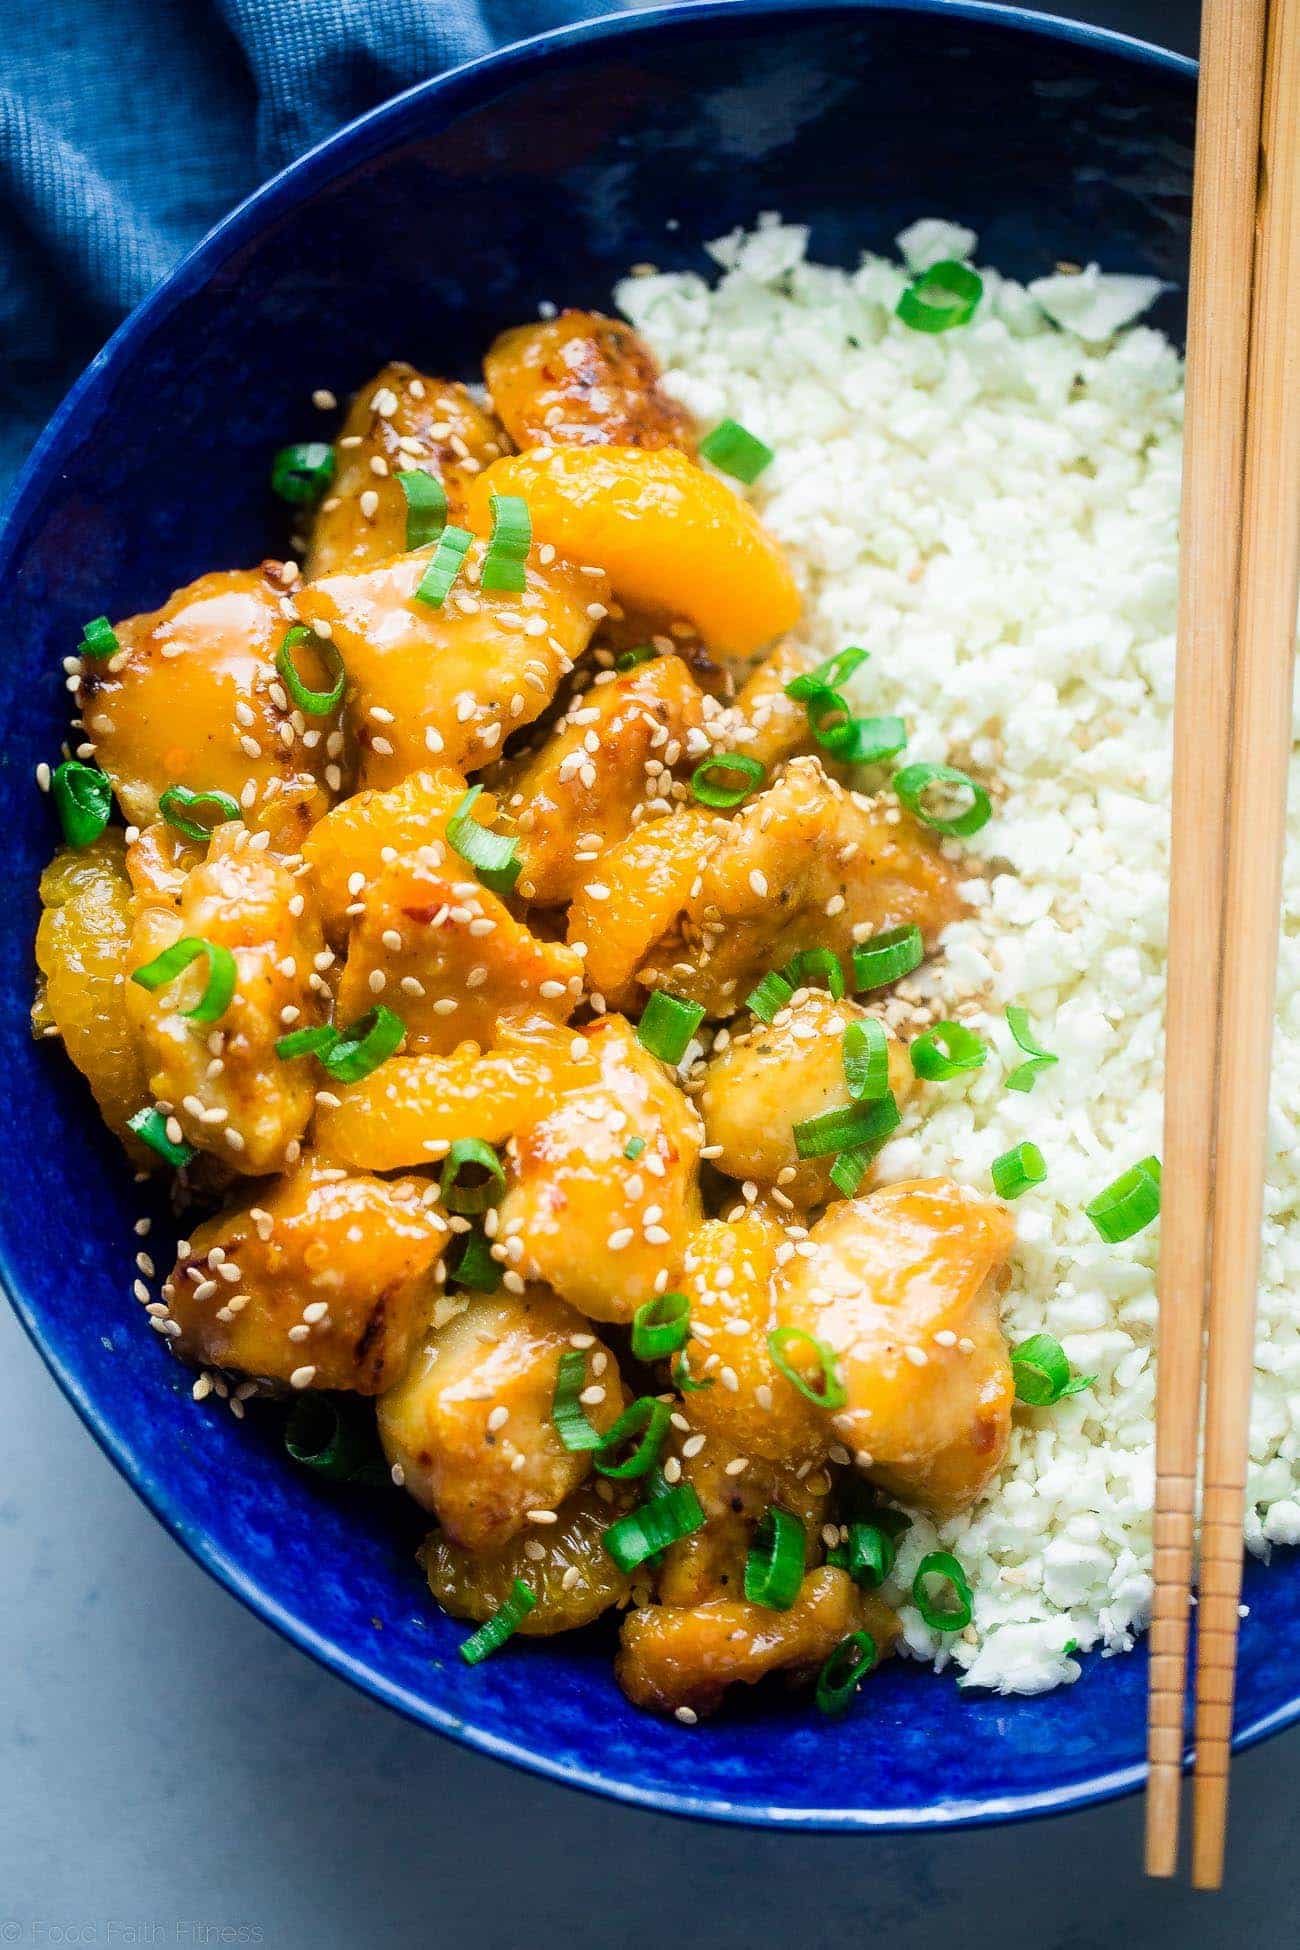 Whole30 Orange Chicken - This 30 minute, paleo orange chicken is so much better and healthier than takeout! It's a quick and easy, whole30 compliant dinner that the whole family will love! | Foodfaithfitness.com | @FoodFaithFit